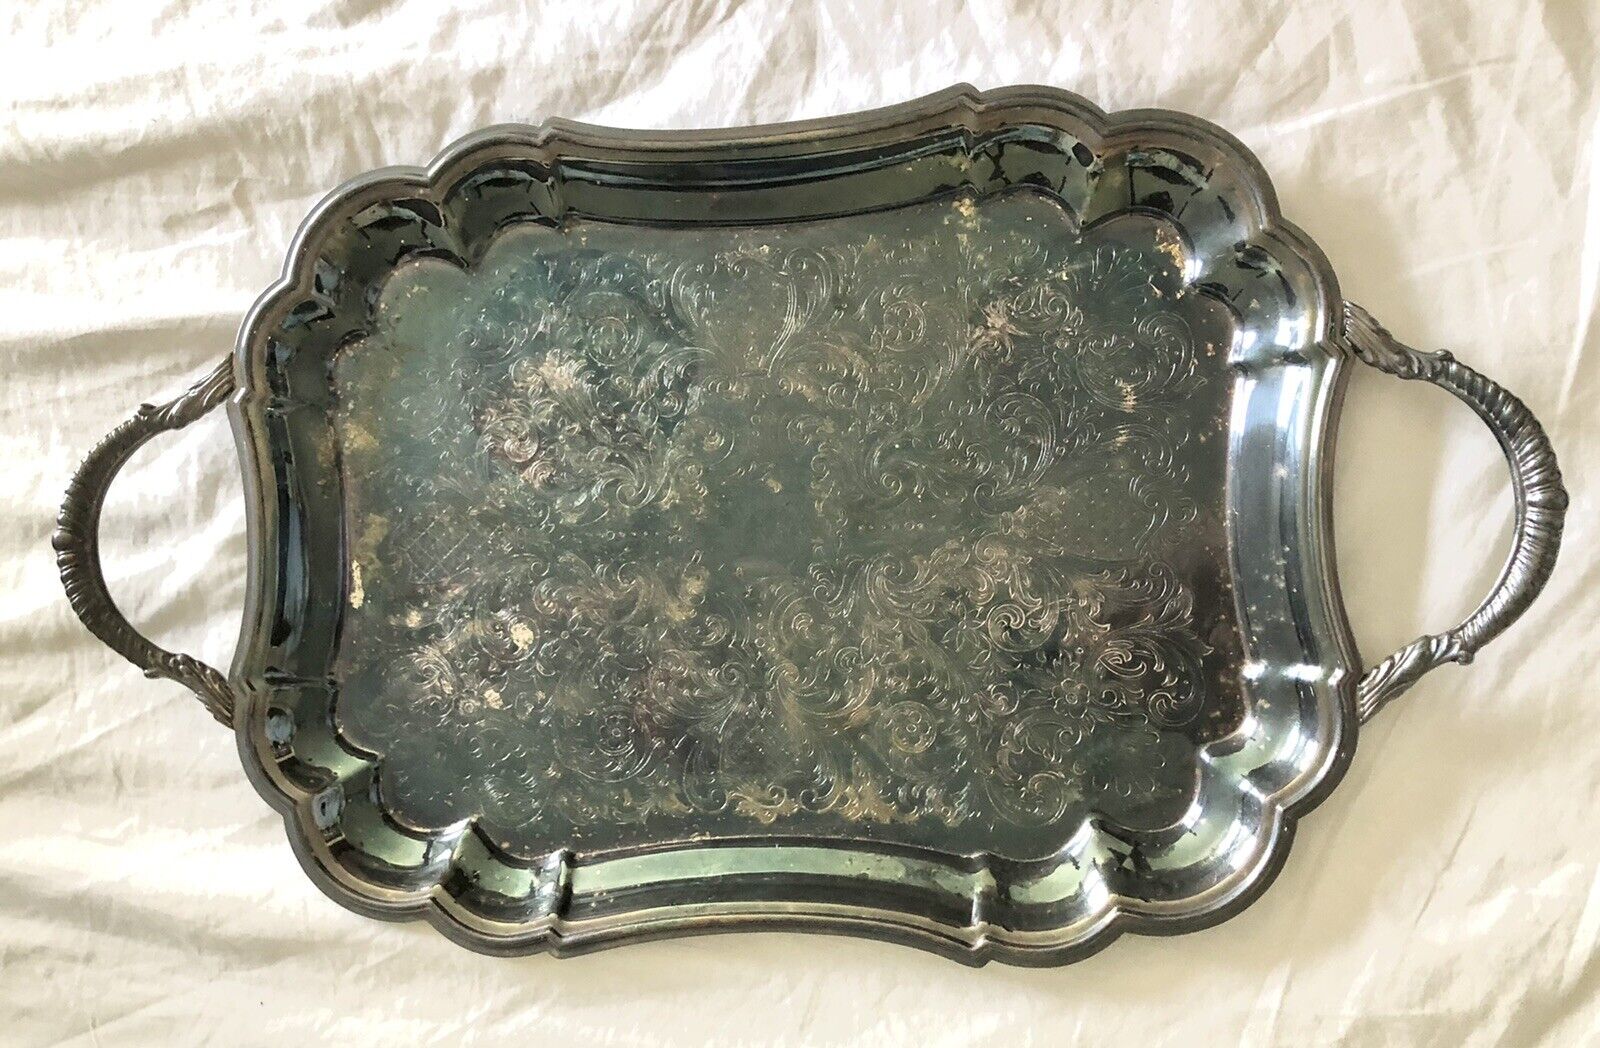 VINTAGE SILVER PLATE SERVING TRAY - BY VIKING PLATE CANADA